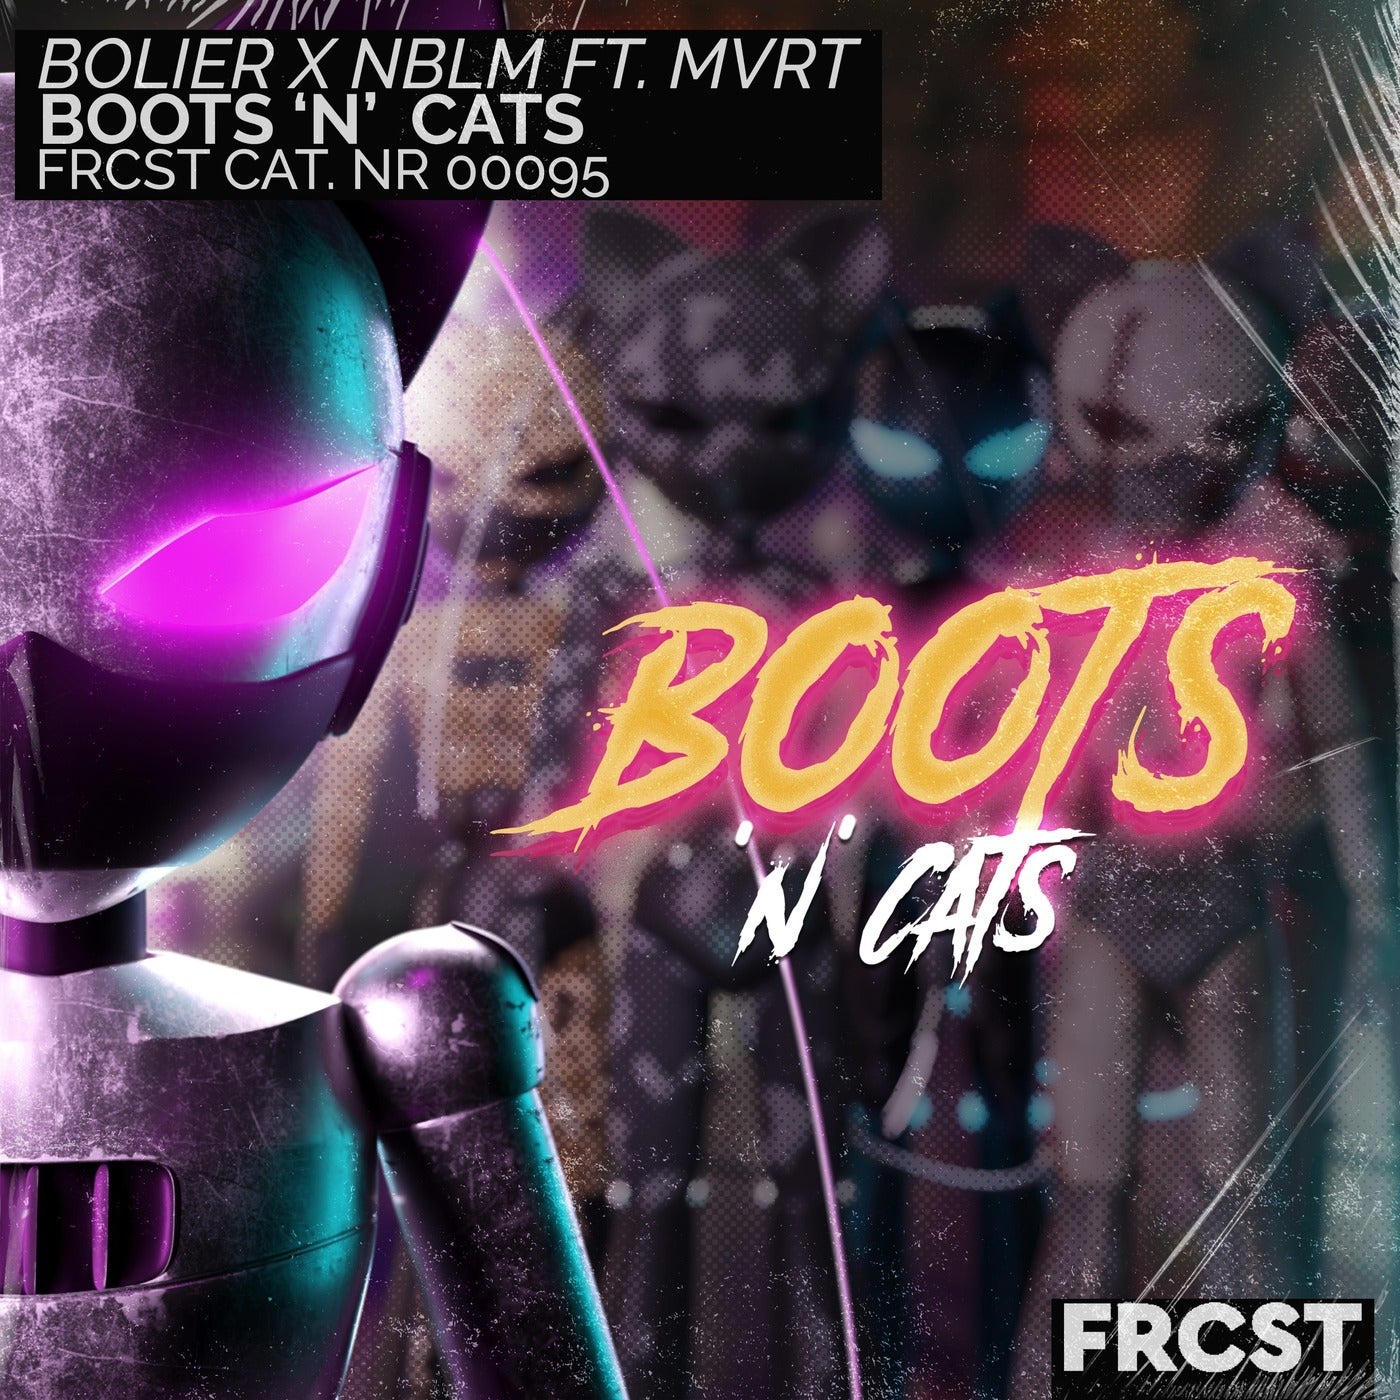 Boots 'N' Cats